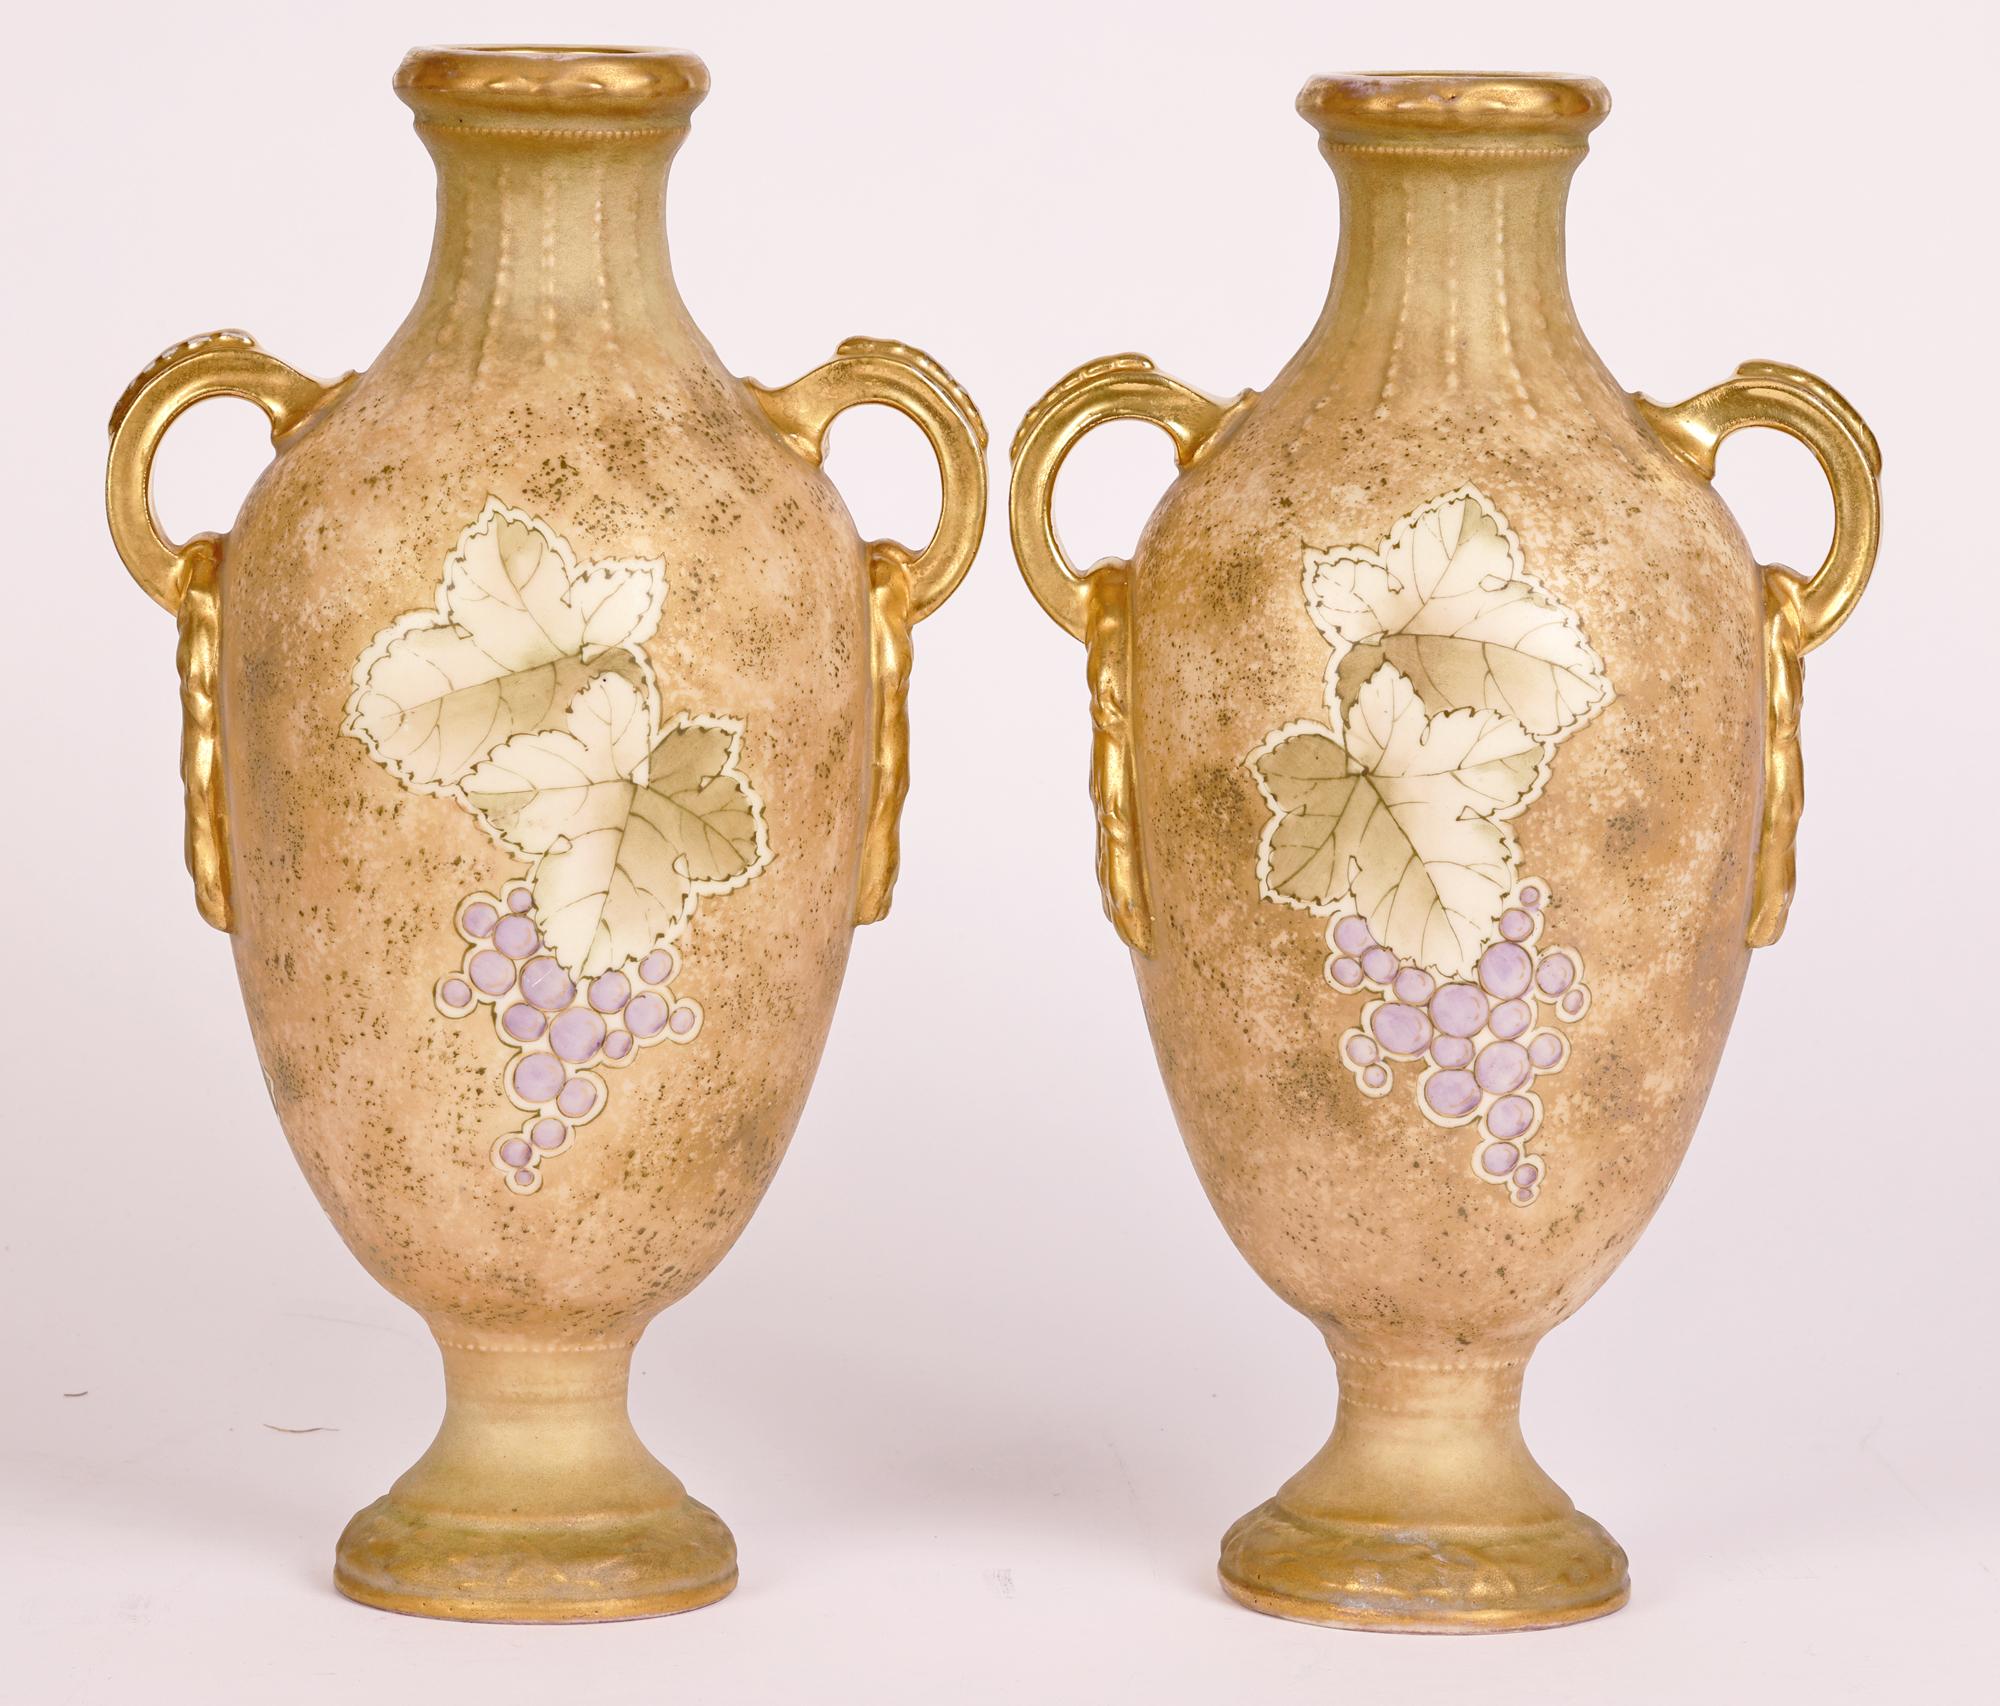 Turn Teplitz RSK Amphora Pair Art Nouveau Hand-Painted Twin Handled Vases For Sale 2